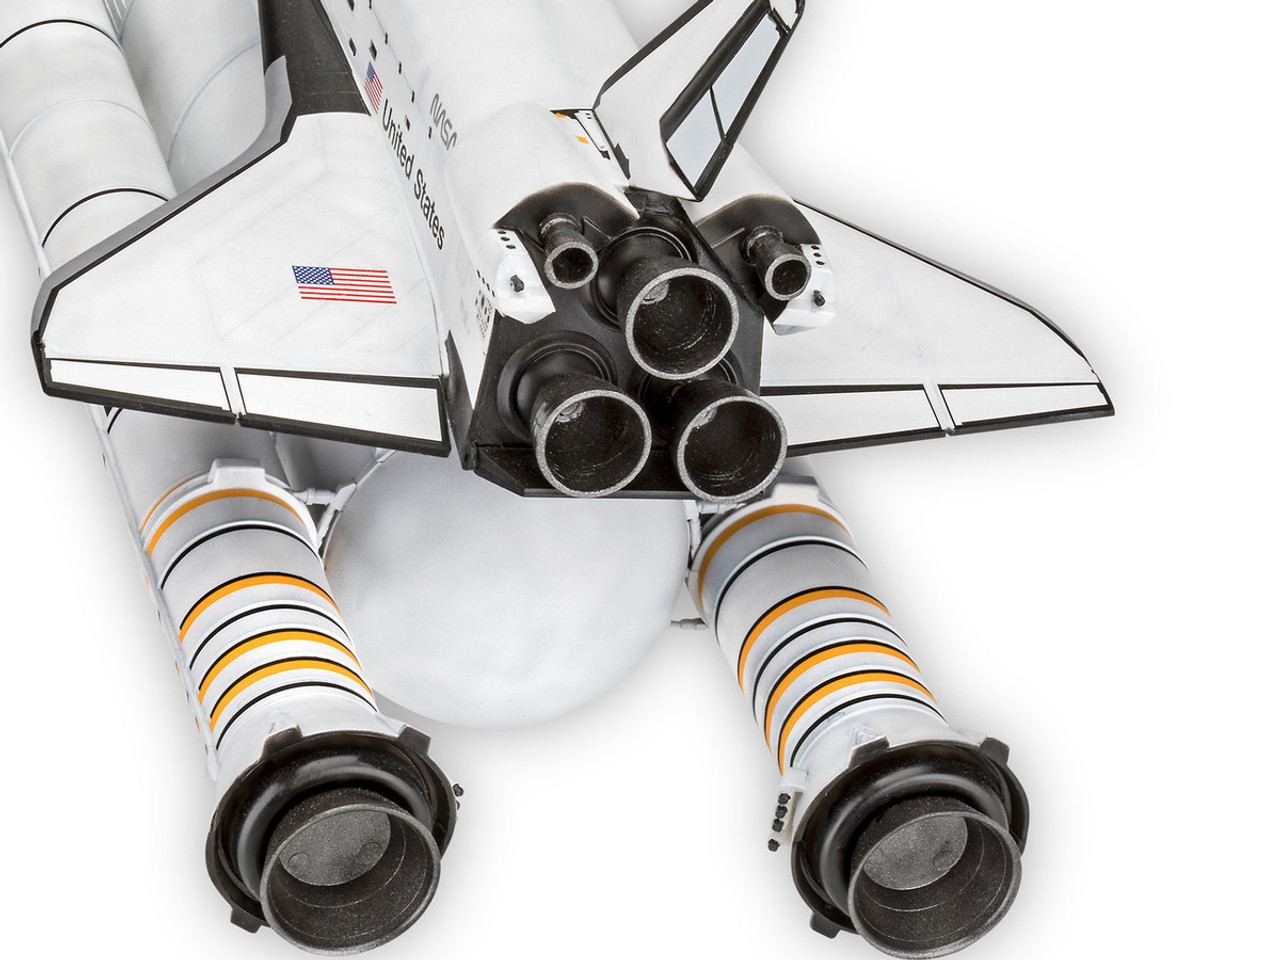 1/114 Revell Level 5 Model Kit NASA Space Shuttle 40th Anniversary with Booster Rockets Model